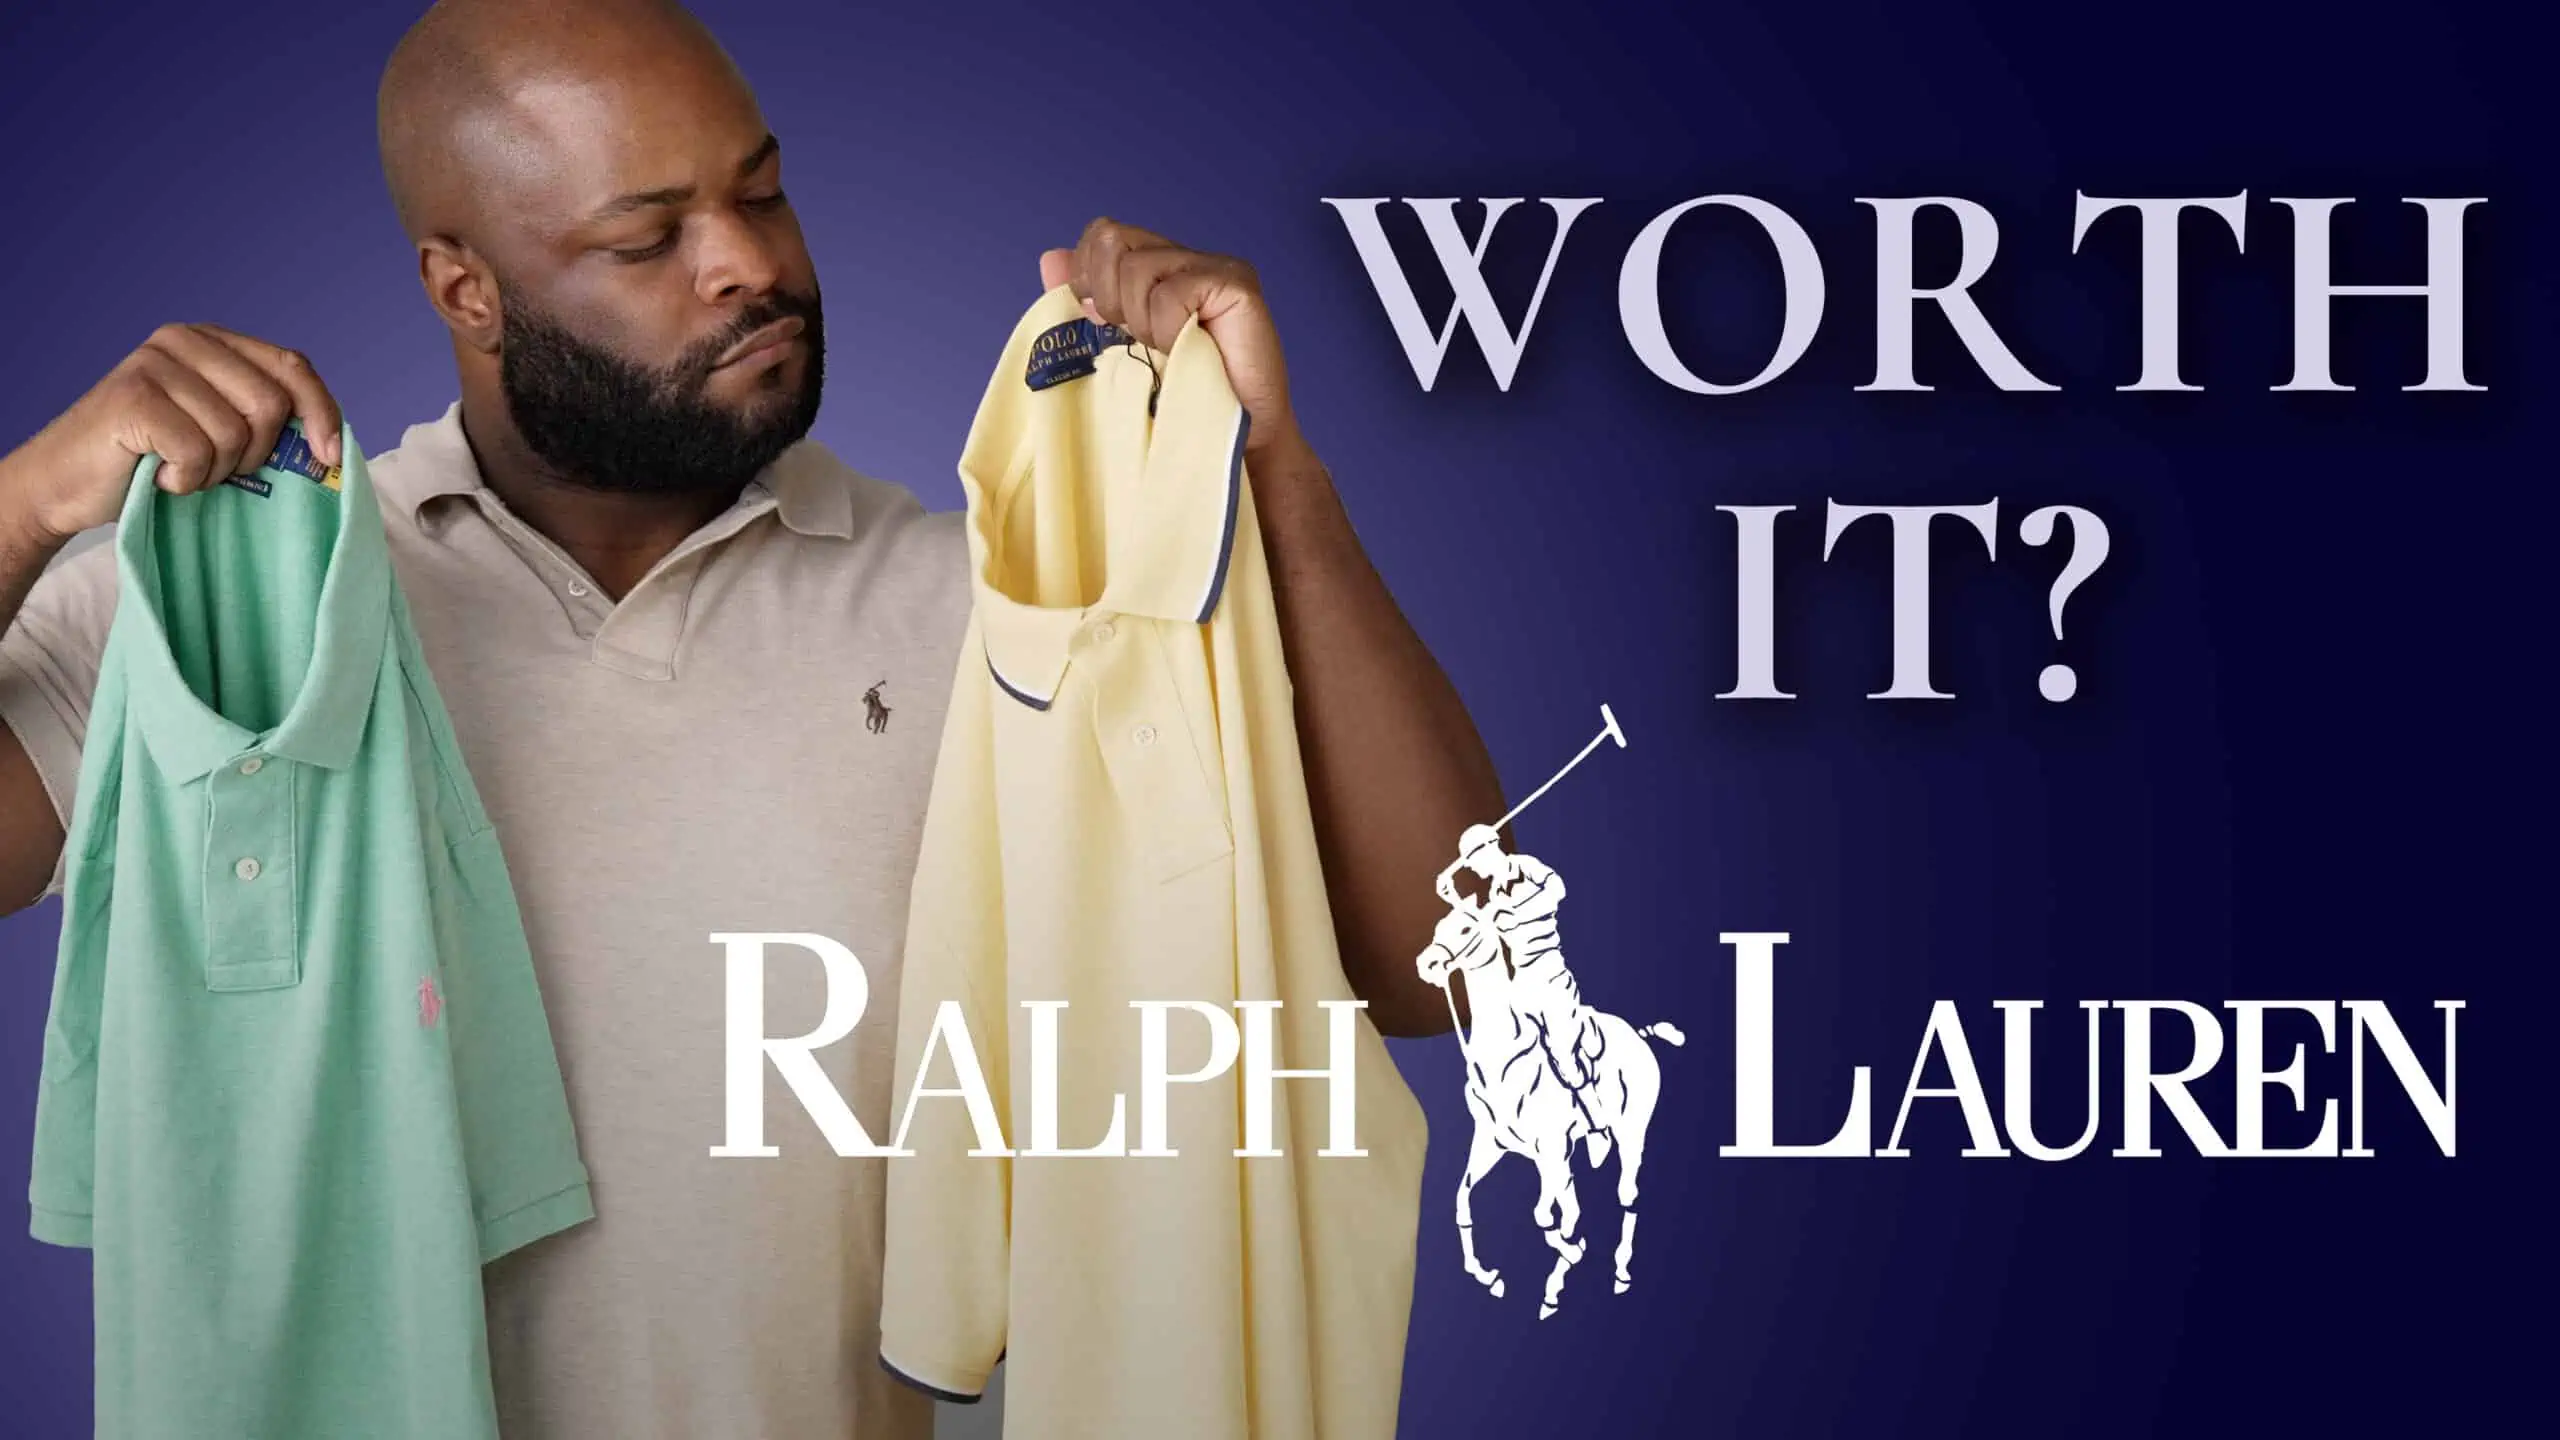 Ralph Lauren - Inspired by our iconic early '90s